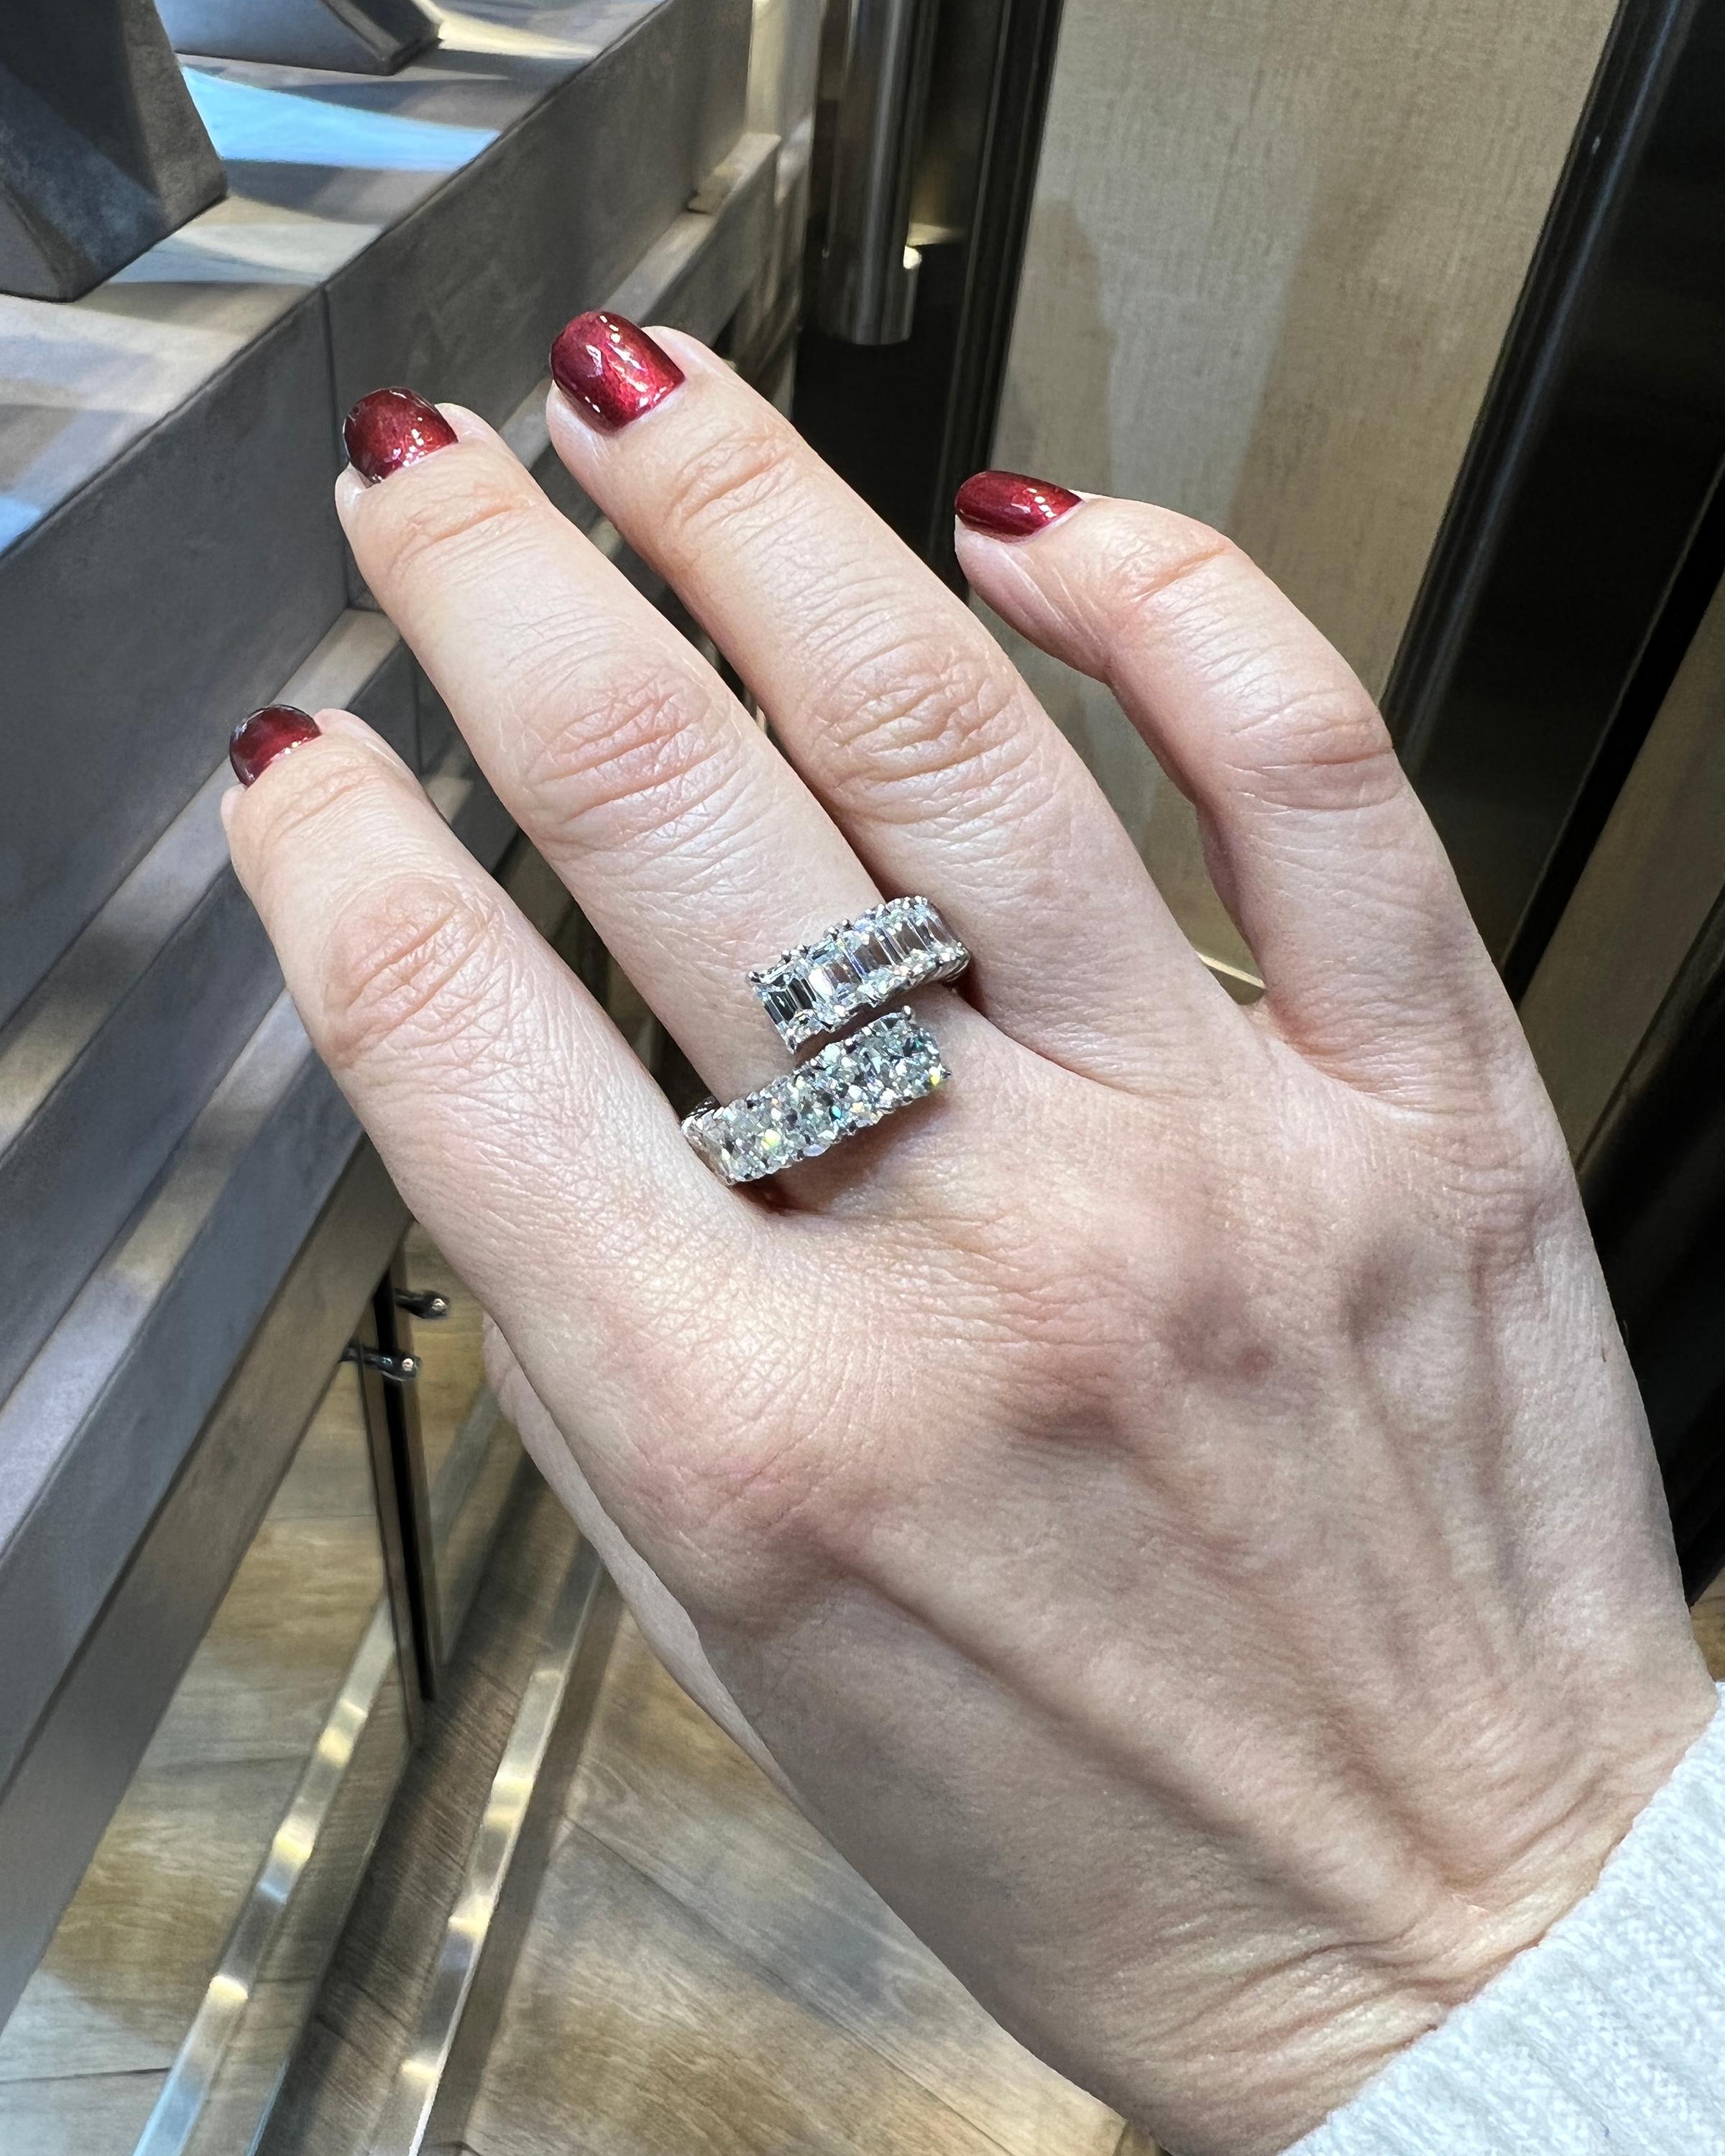 A diamond bypass ring comprising of 14 emerald-cut diamonds weighing 2.95 carats and 11 oval diamonds weighing 2.63 carats. Total weight is 5.58 carats.
The diamonds are not certified and are estimated as F-G colors, VS clarity.
Metal is 18k white